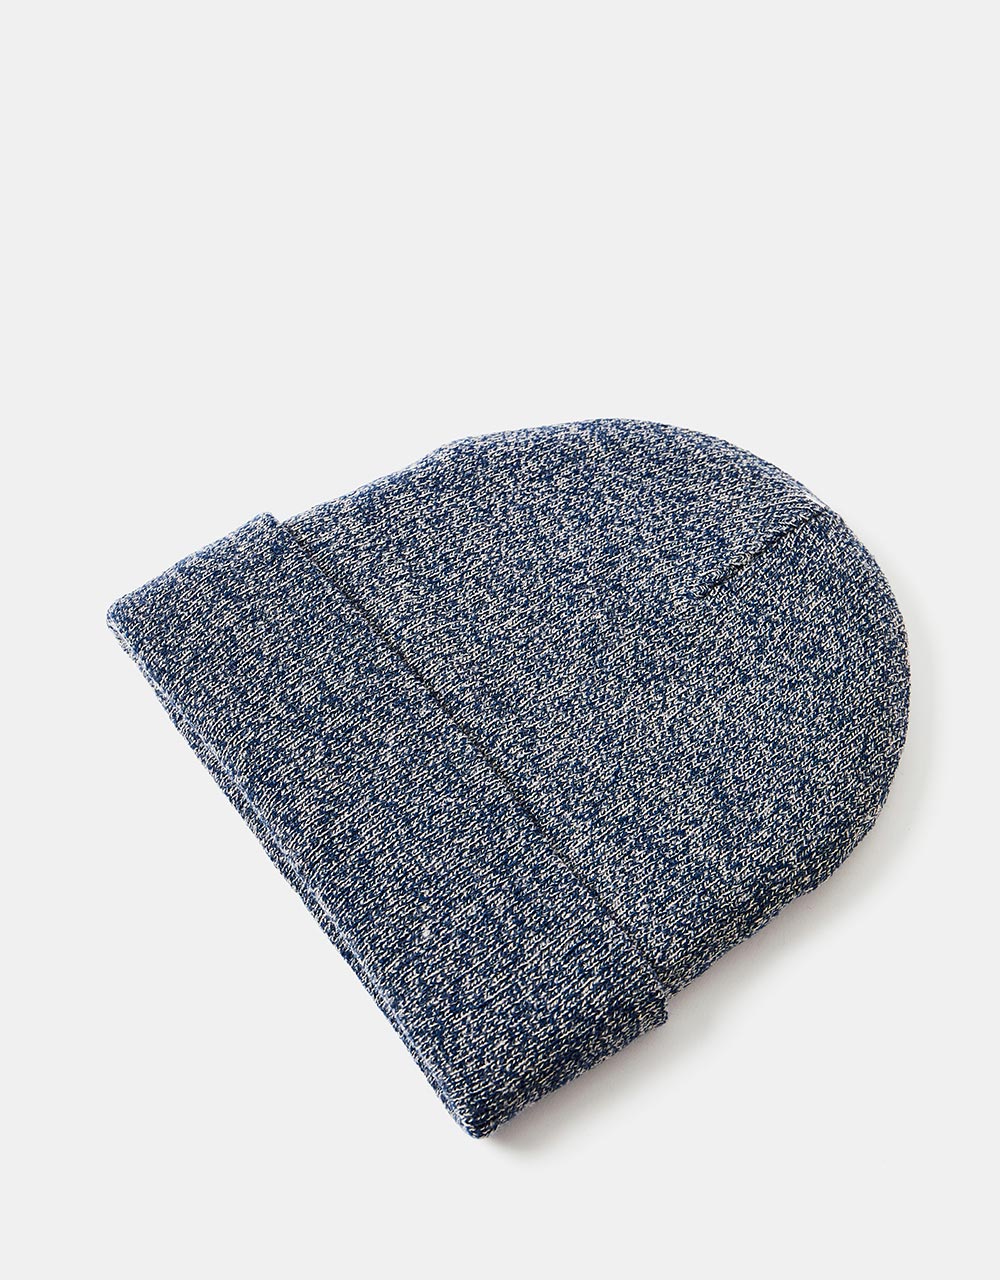 Route One Recycled NY Cuff Beanie - Heather Blue